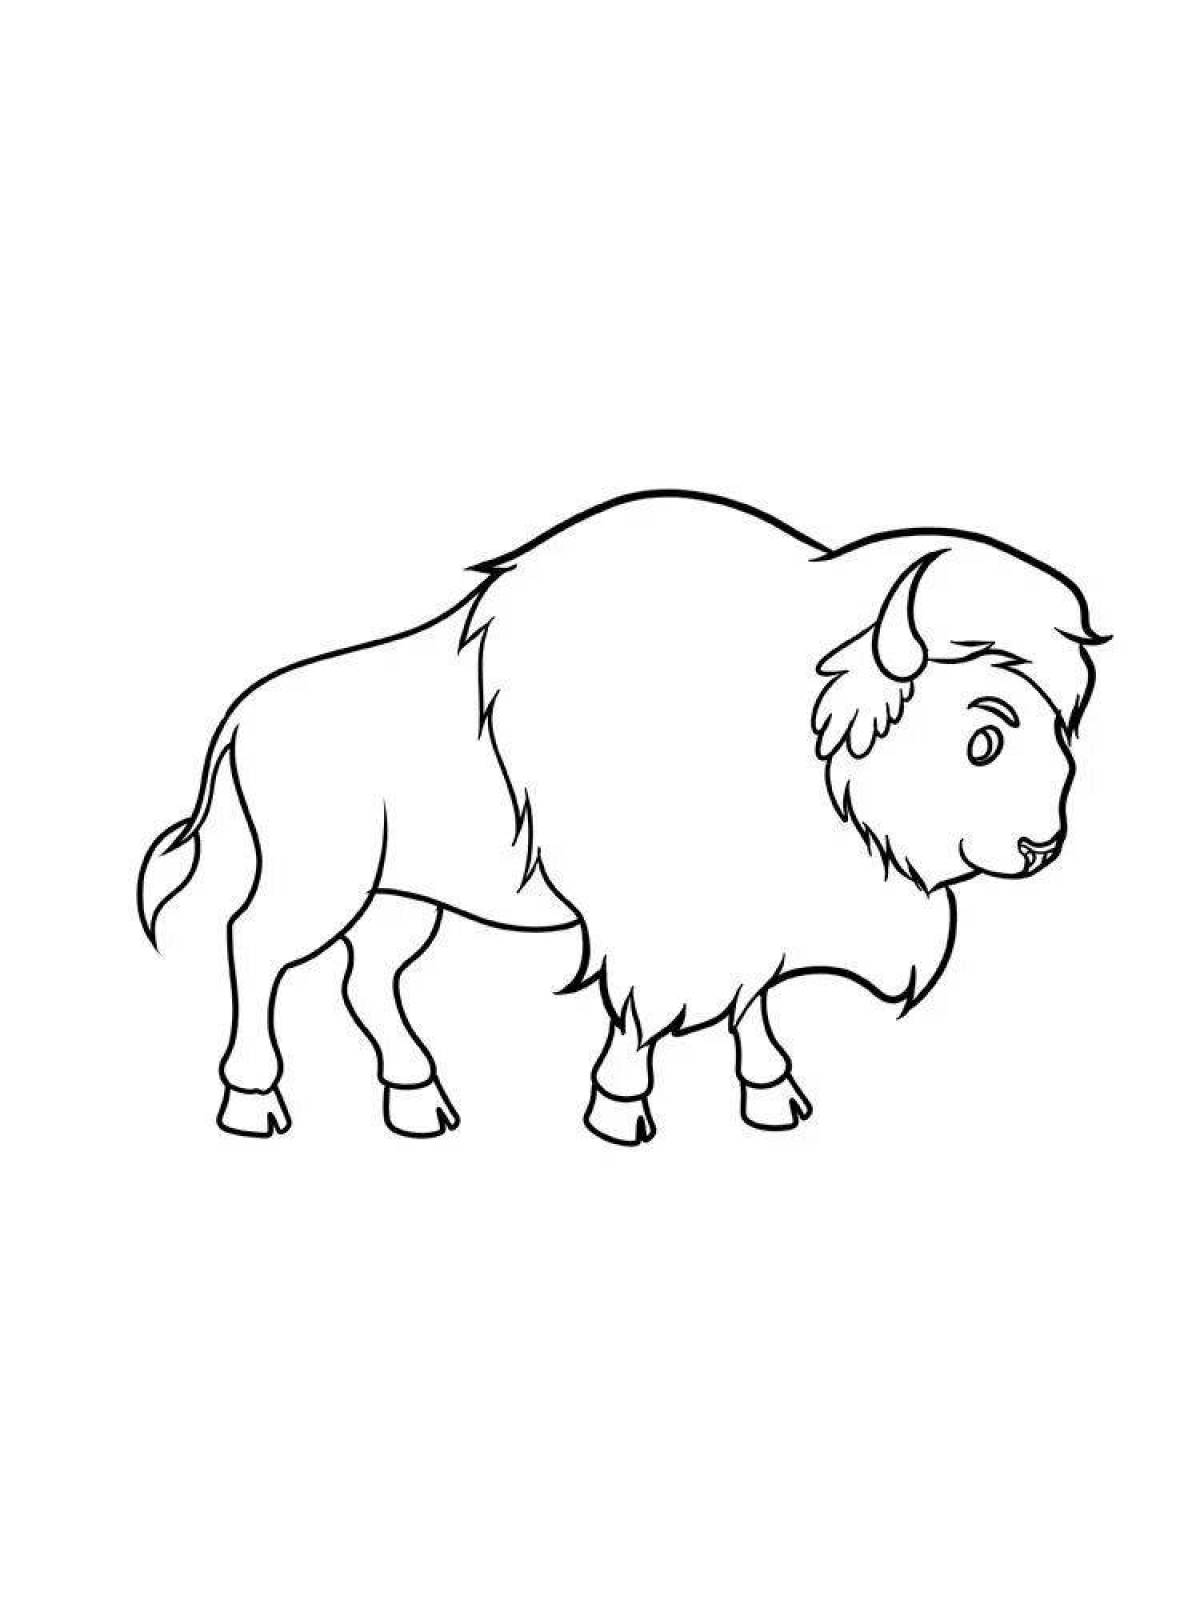 Amazing bison coloring pages for kids